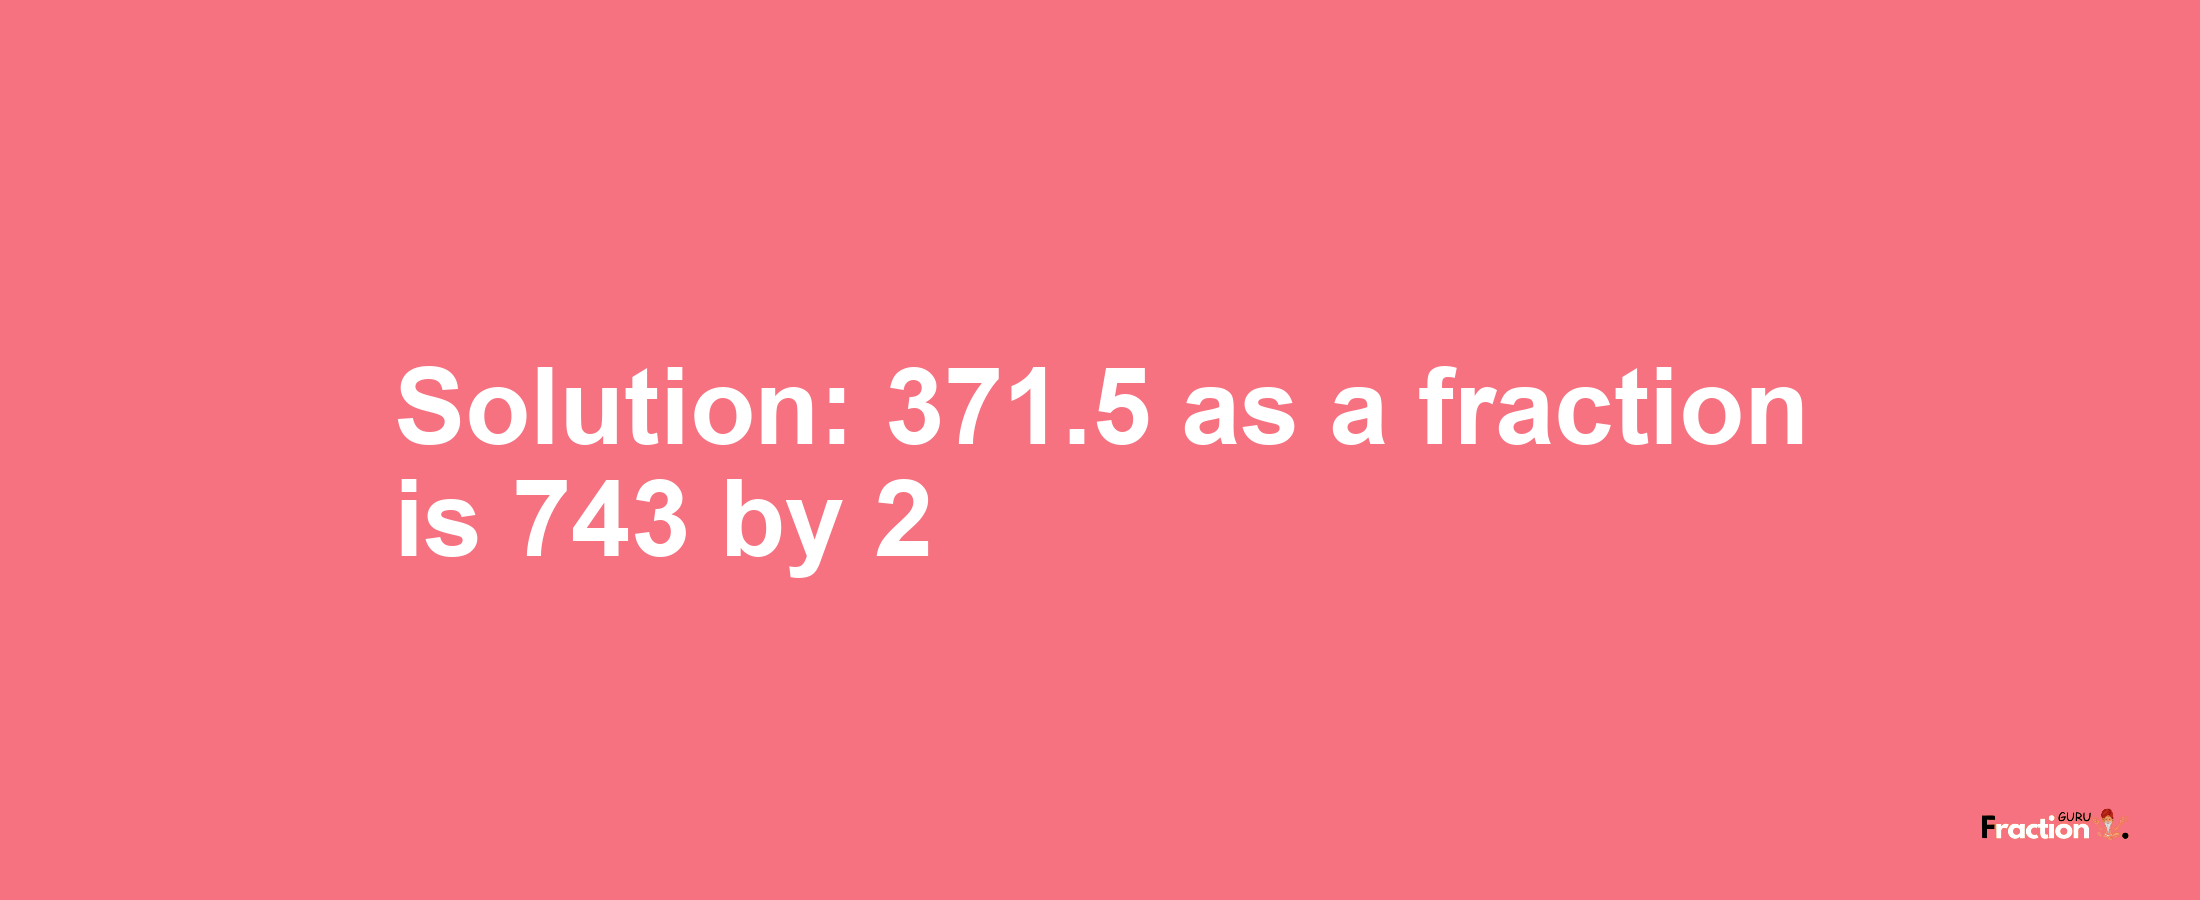 Solution:371.5 as a fraction is 743/2